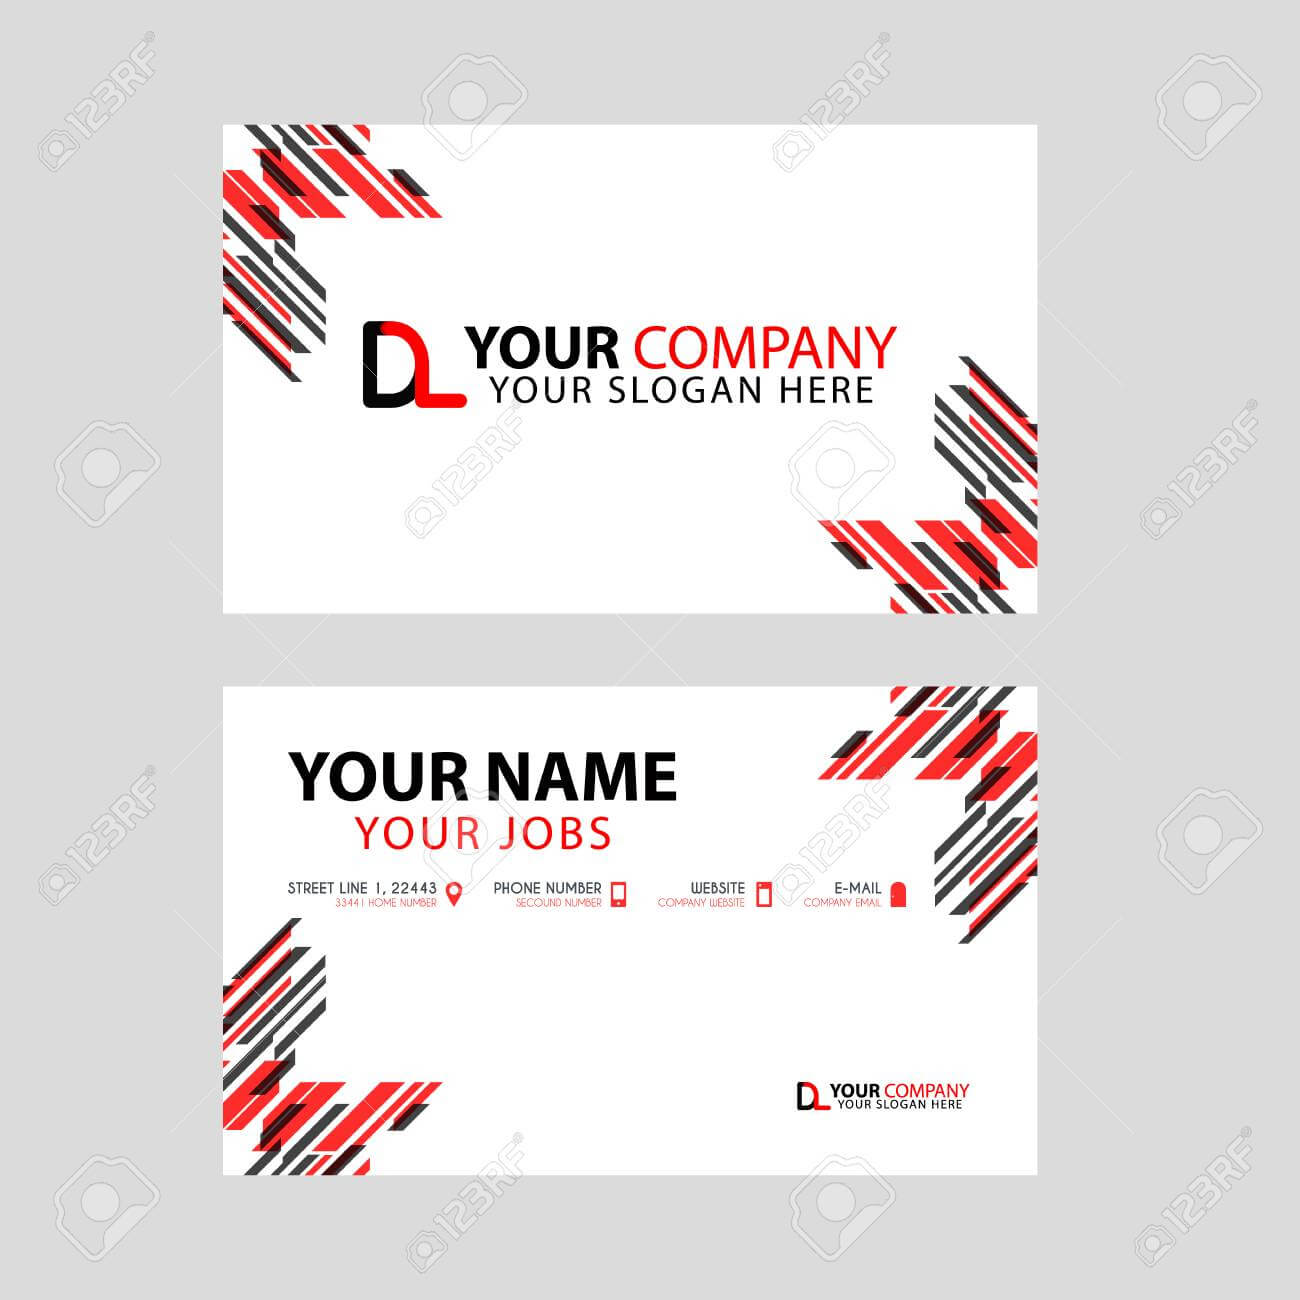 Business Card Template In Black And Red. With A Flat And Horizontal.. Regarding Dl Card Template